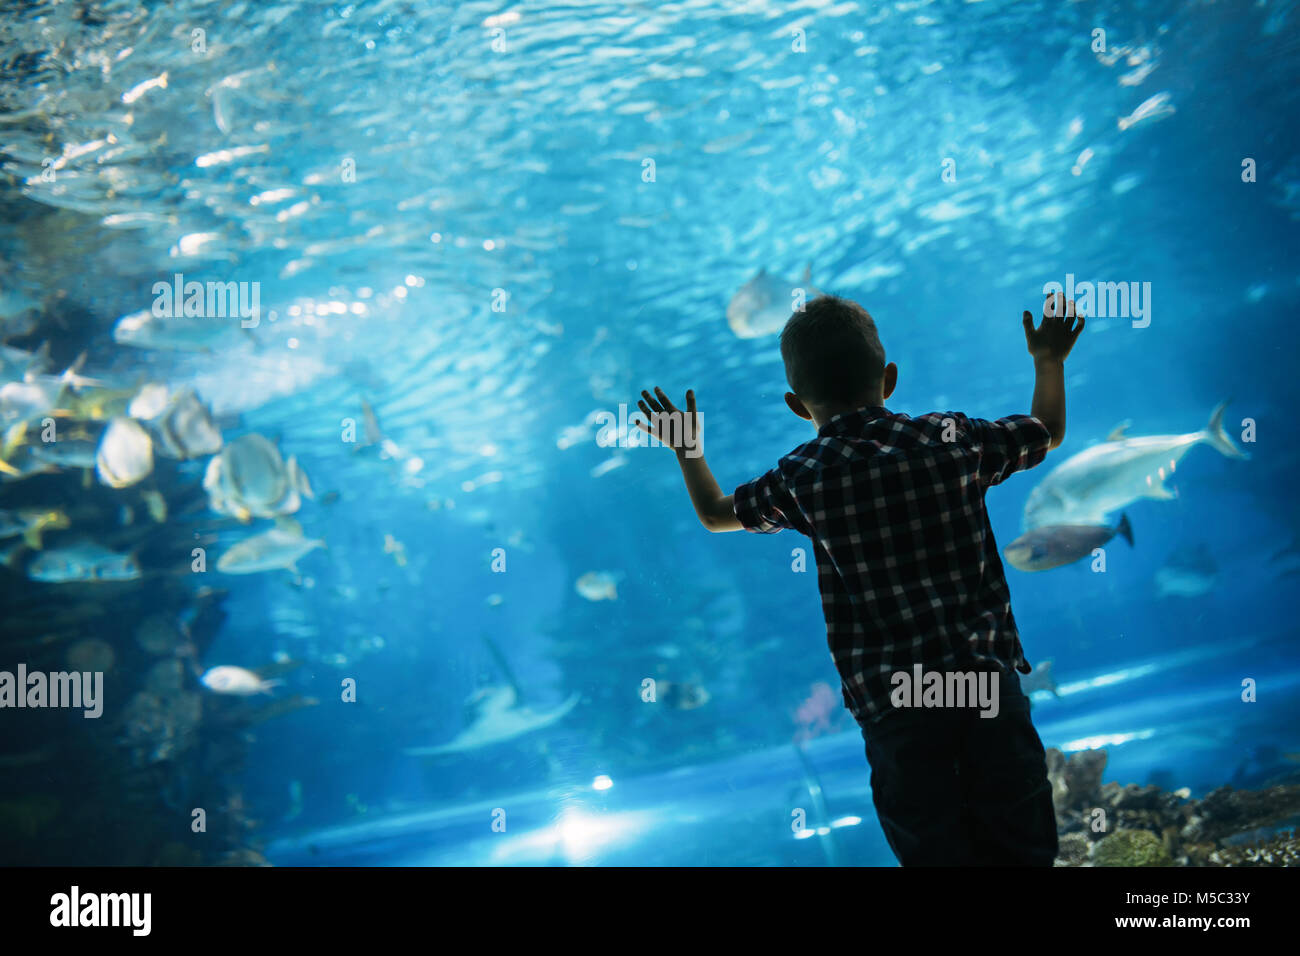 Serious boy looking in aquarium with tropical fish Stock Photo